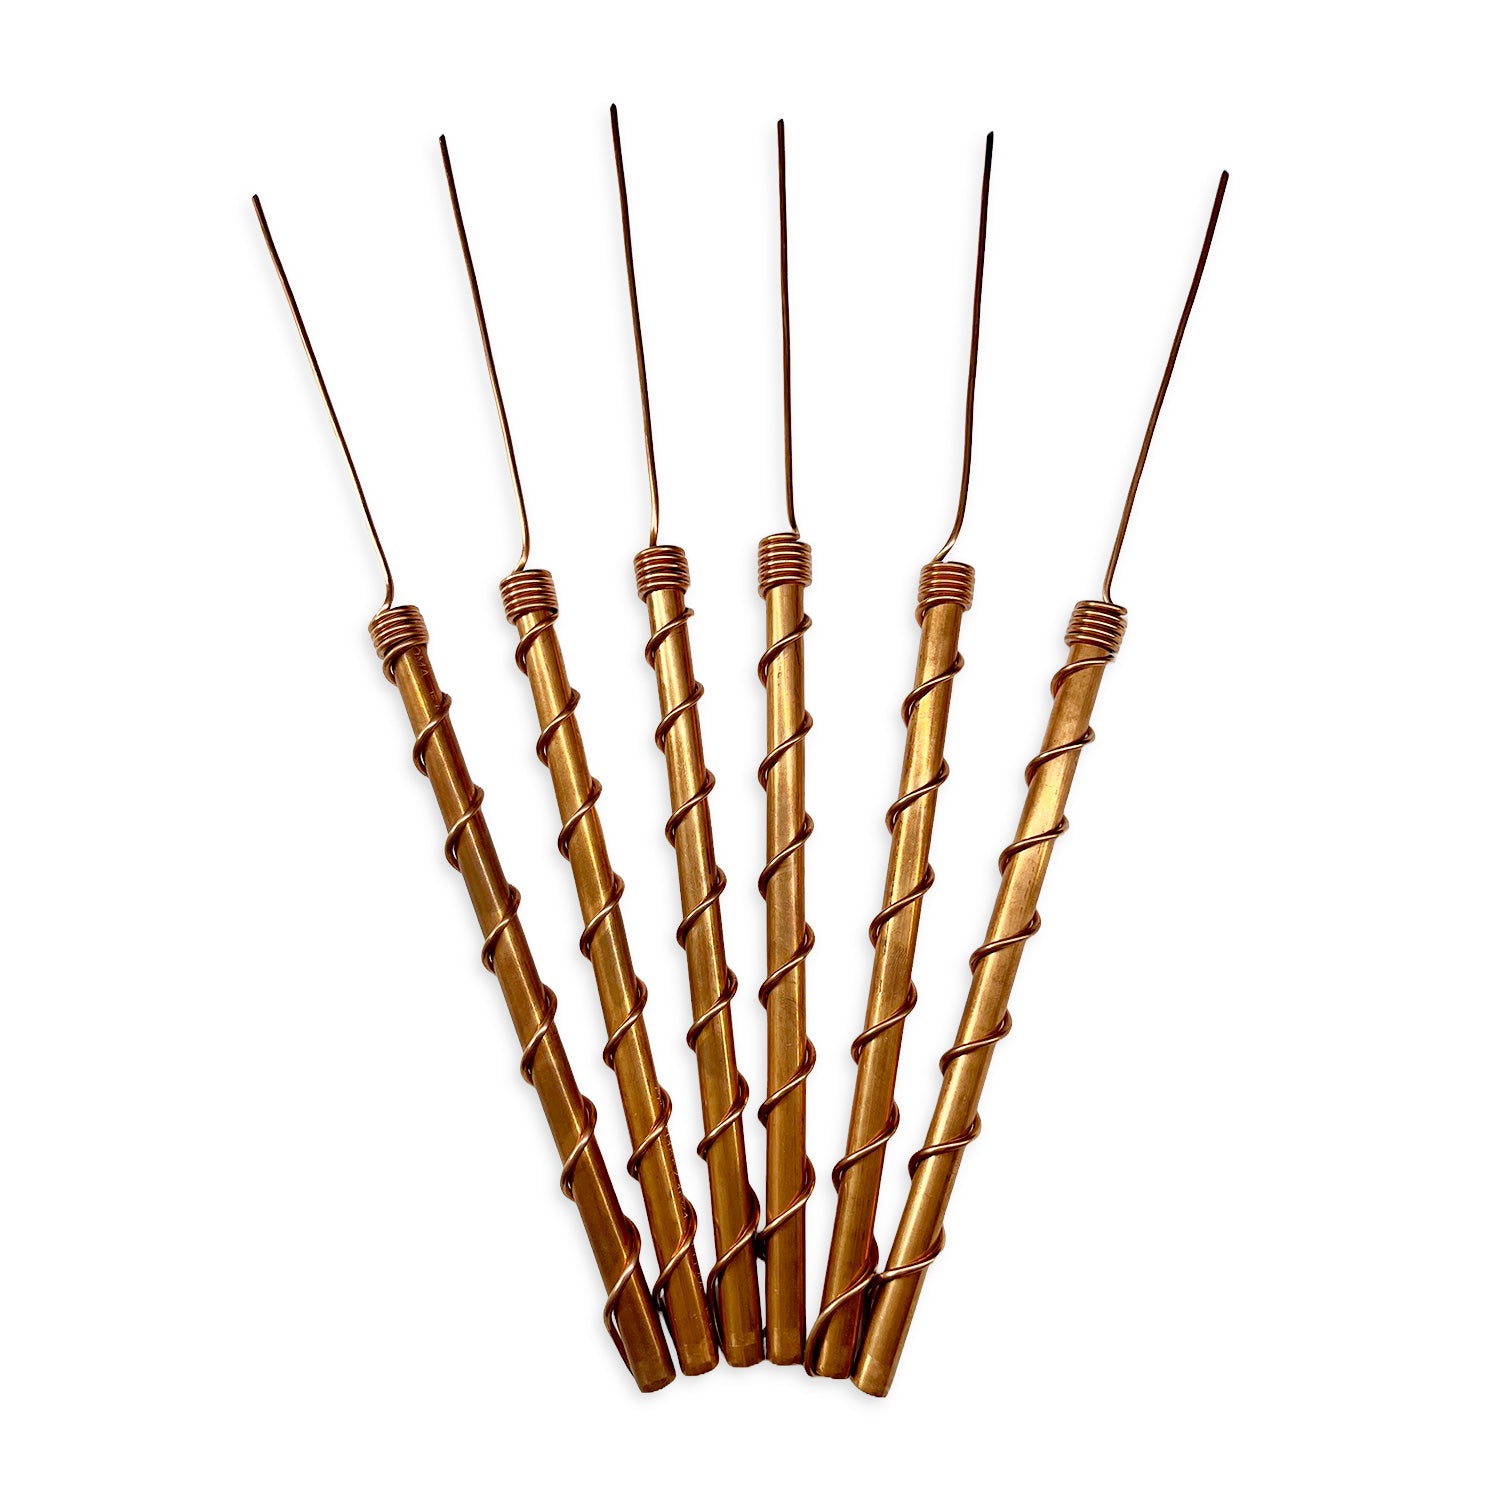 Electroculture Garden Plant Stakes,6 Pack 12 Electroculture Copper  Gardening Antennas for Accelerated Growing, Made of 99.9% Pure Solid Copper  Wire